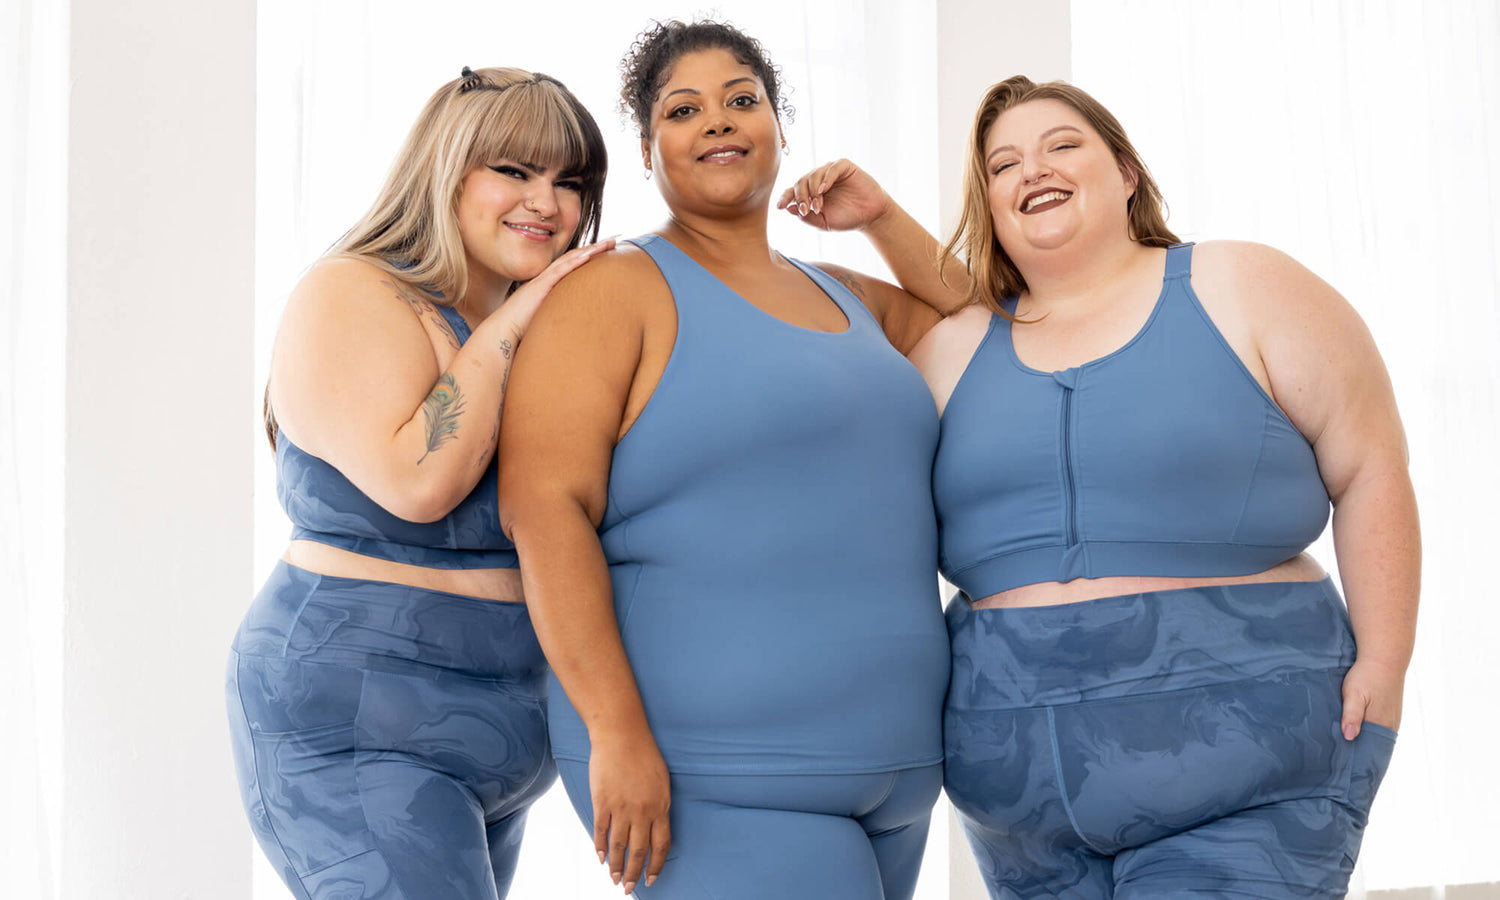 Three plus size models welcome you to the Superfit Hero Community. They're wearing Moonlight Blue and Moonlight Marble Zip Front Sports Bras & Shelf Bra Tank Tops.